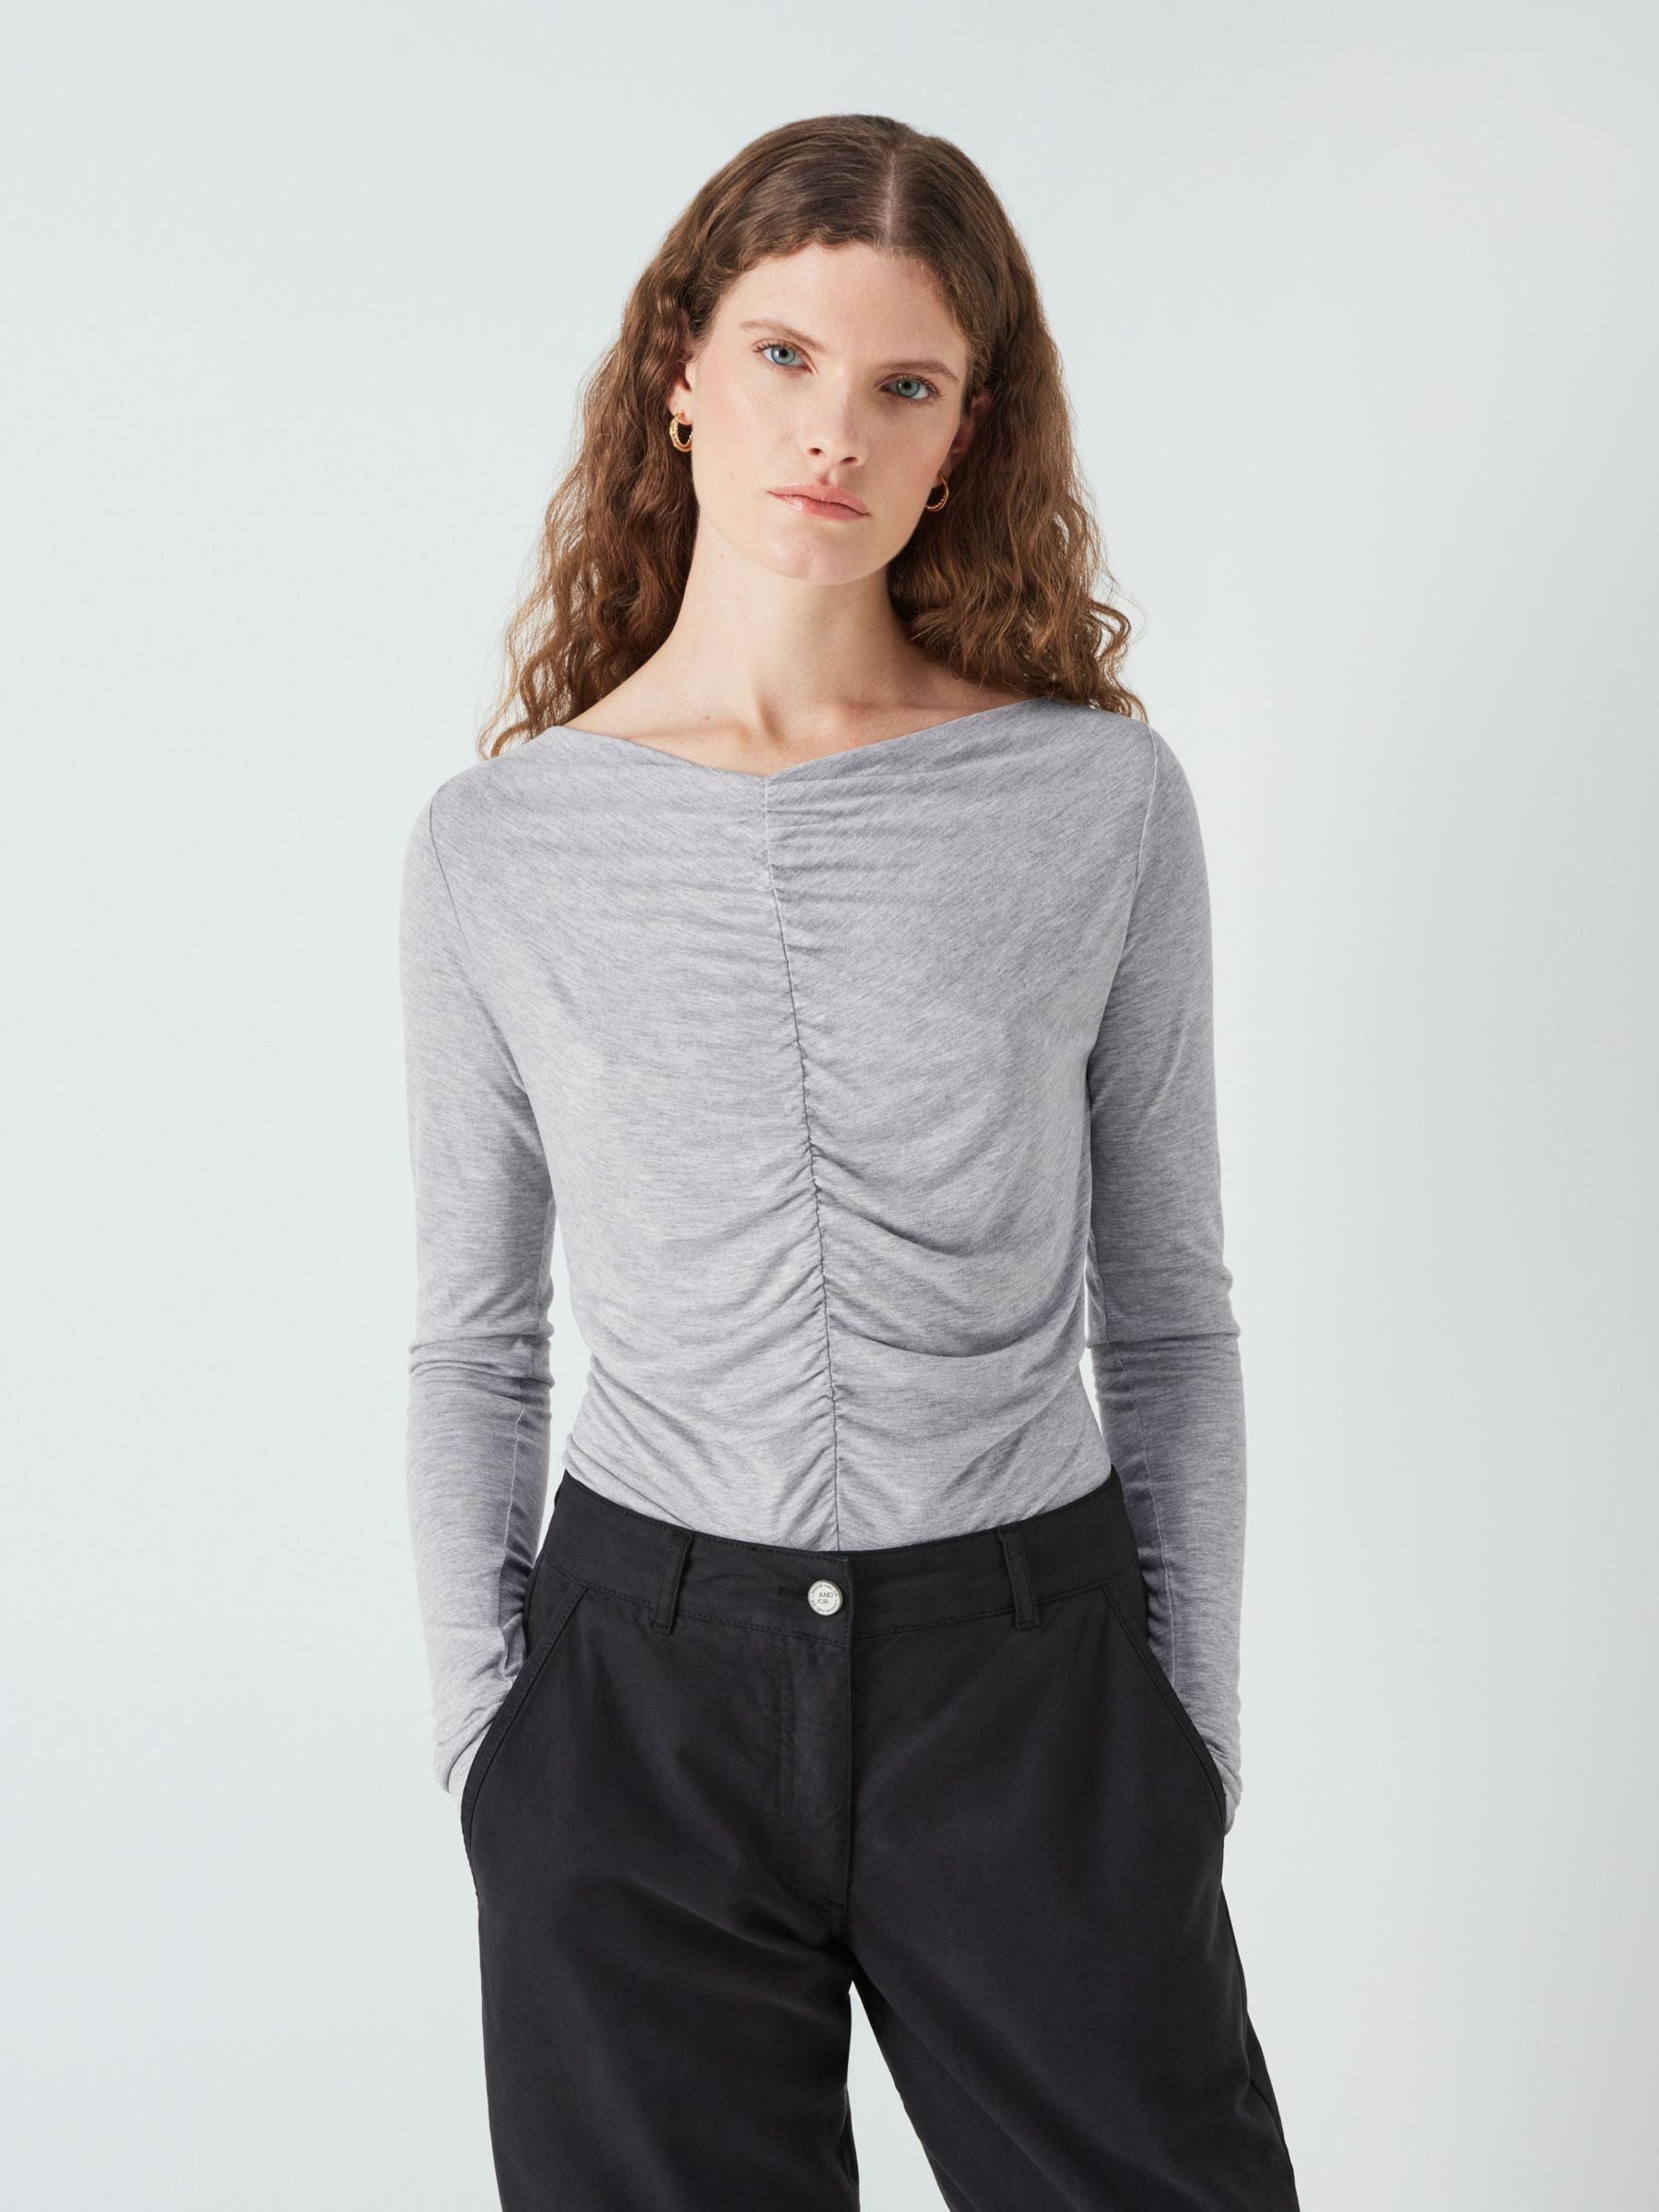 AND/OR Raine Plain Ruched Top, Charcoal Marl at John Lewis & Partners